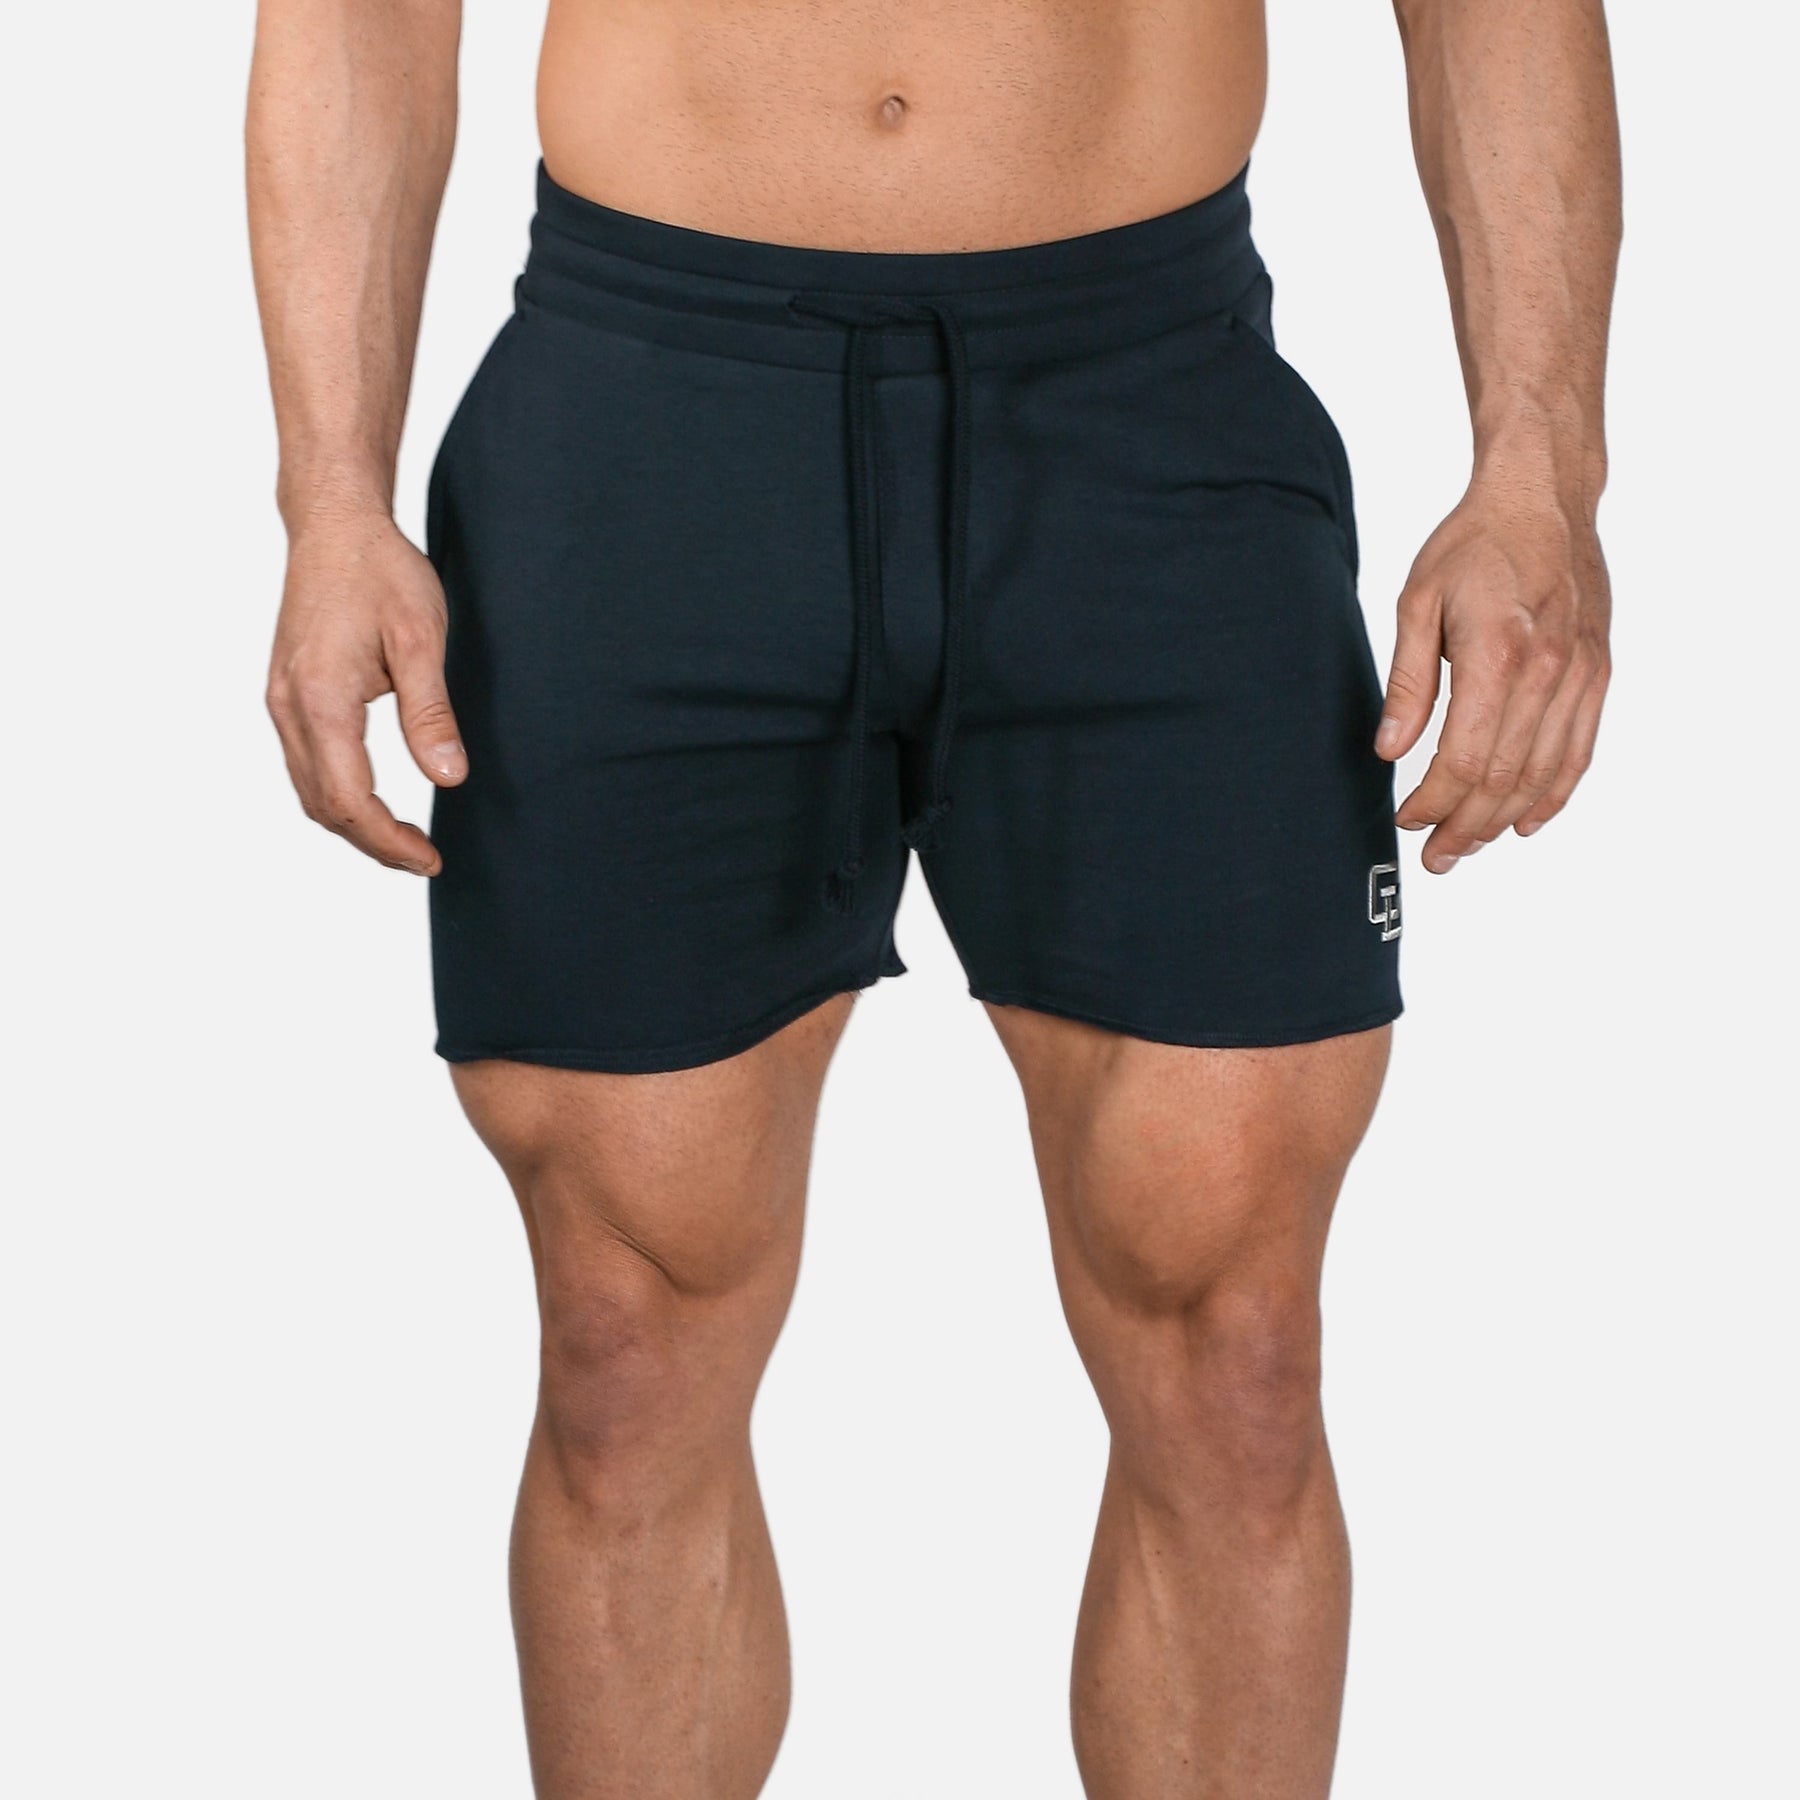 Leg Day: Lifting Shorts for Working Out – The Menswear Newsletter